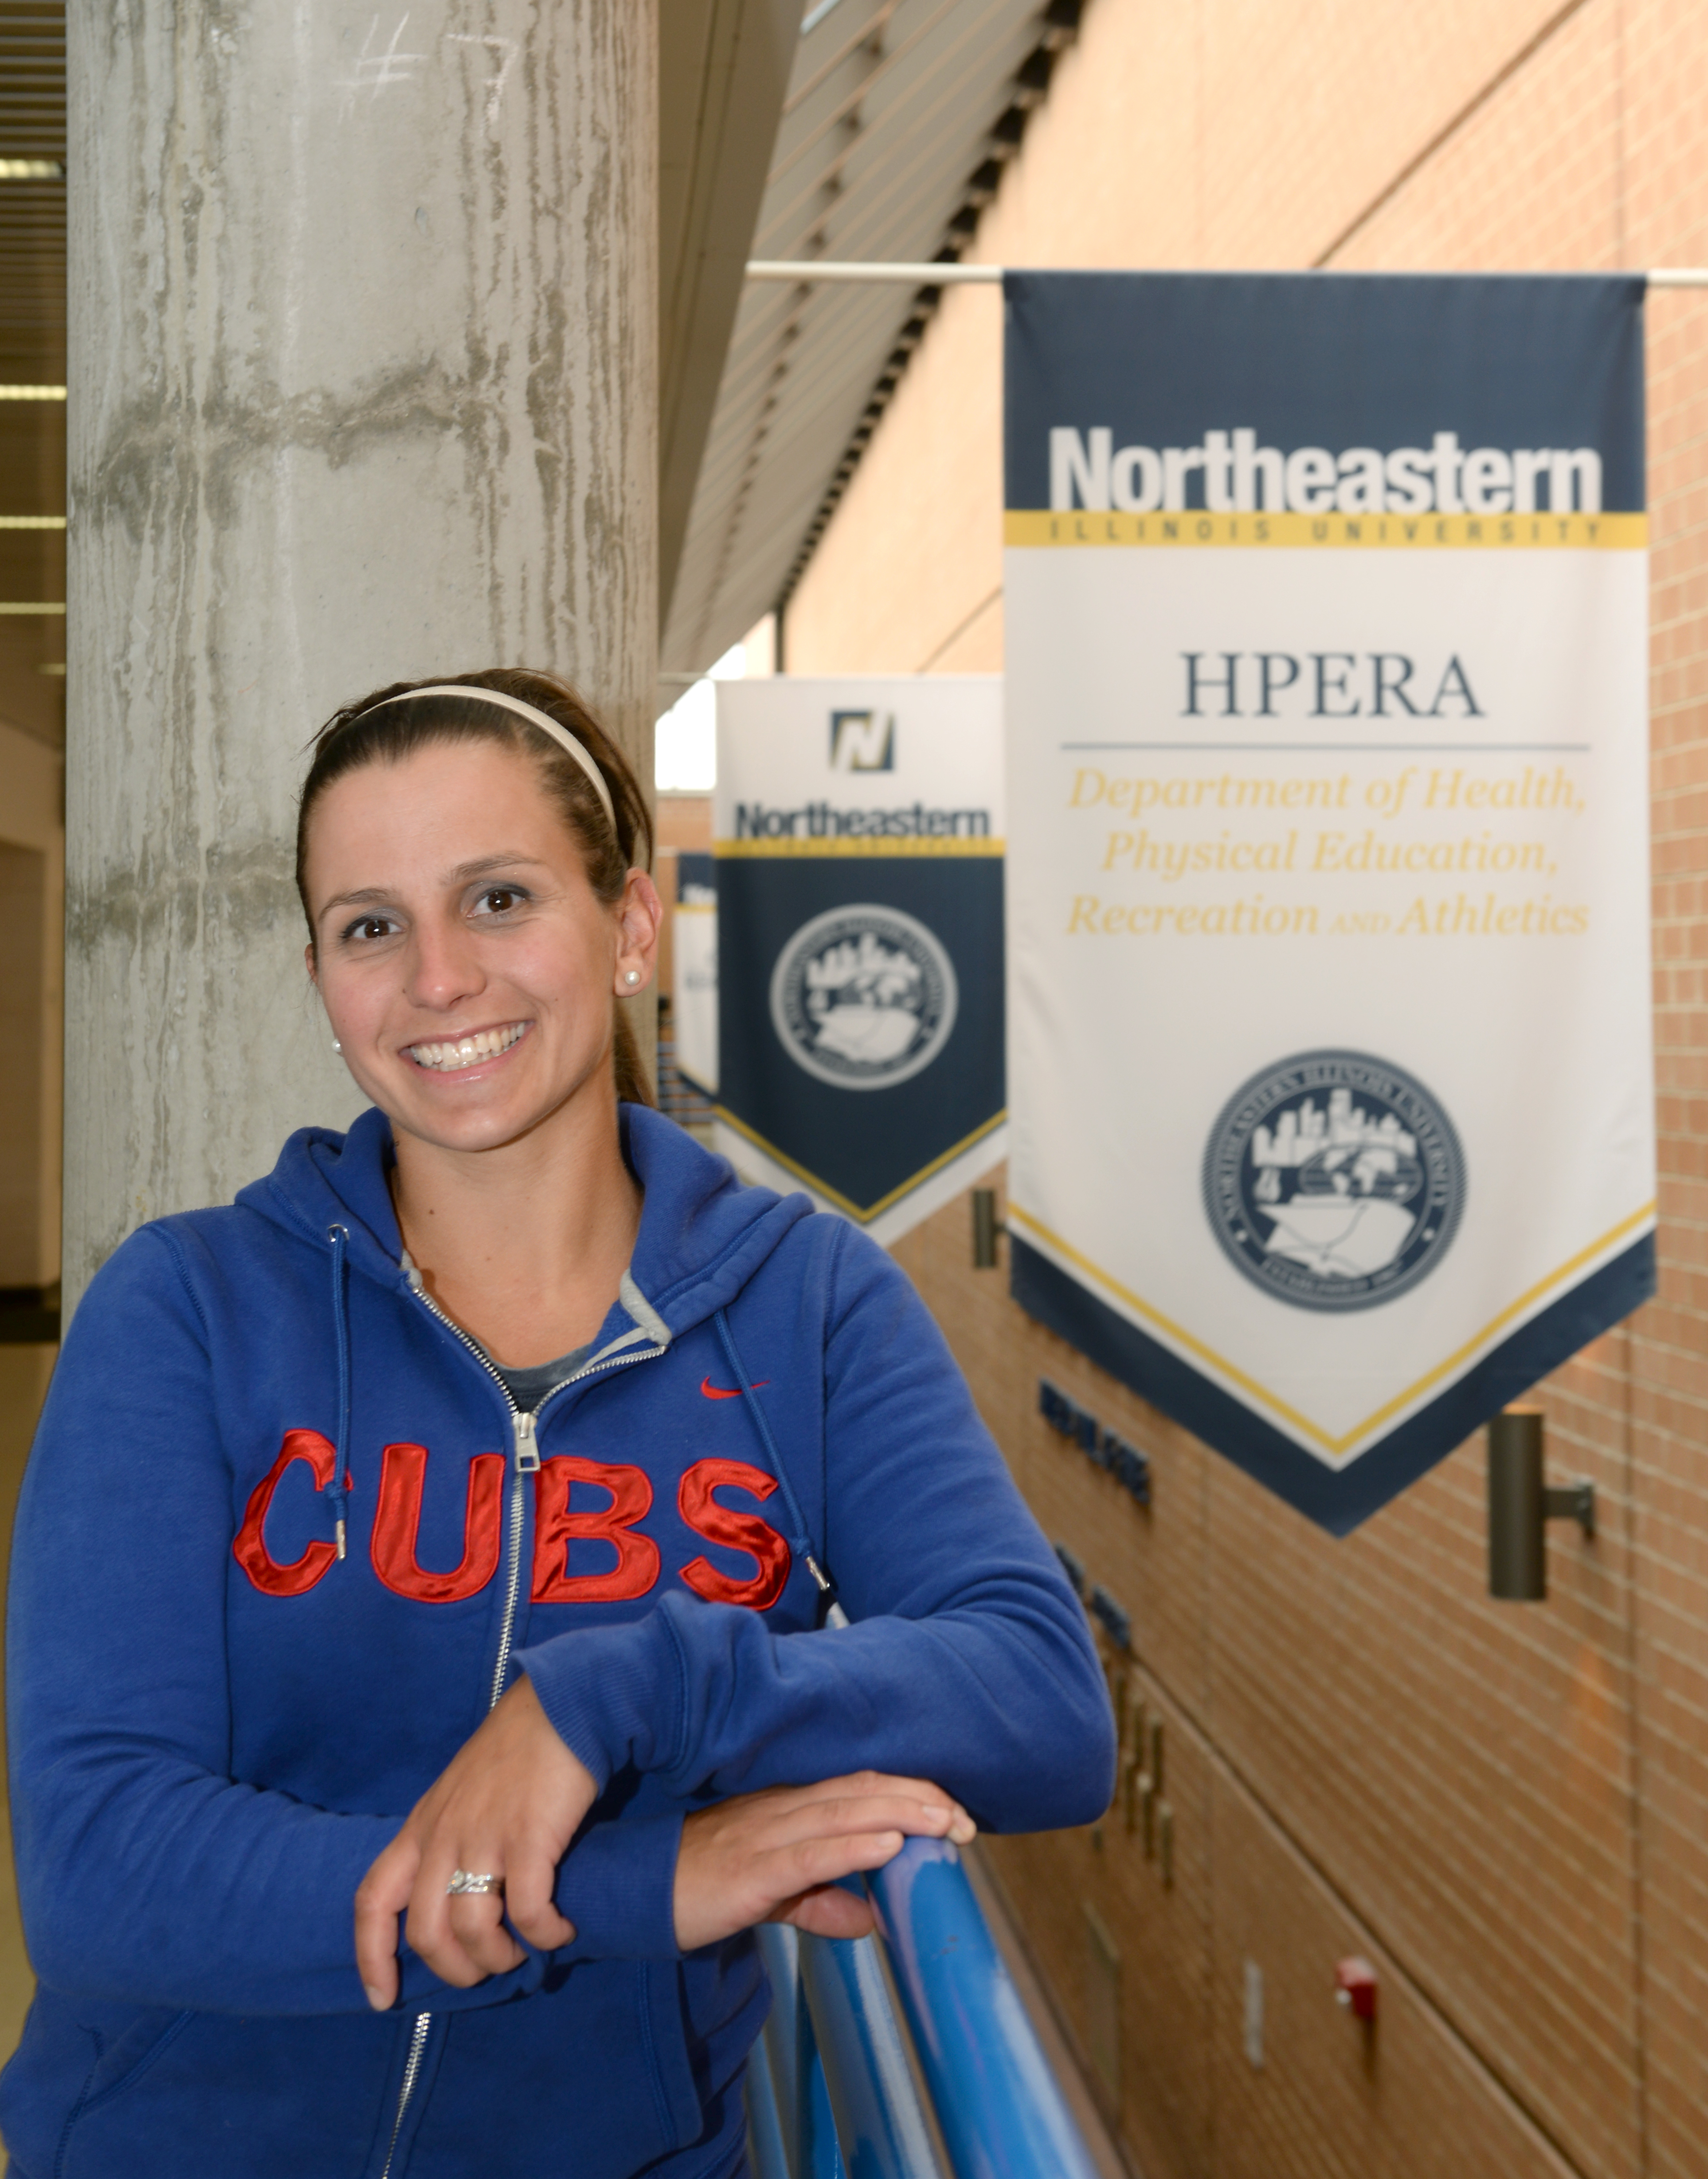 Gina Ridge, Fall 2015 NEIUAA Internship Scholarship recipient, poses in front of two Northeastern signs.